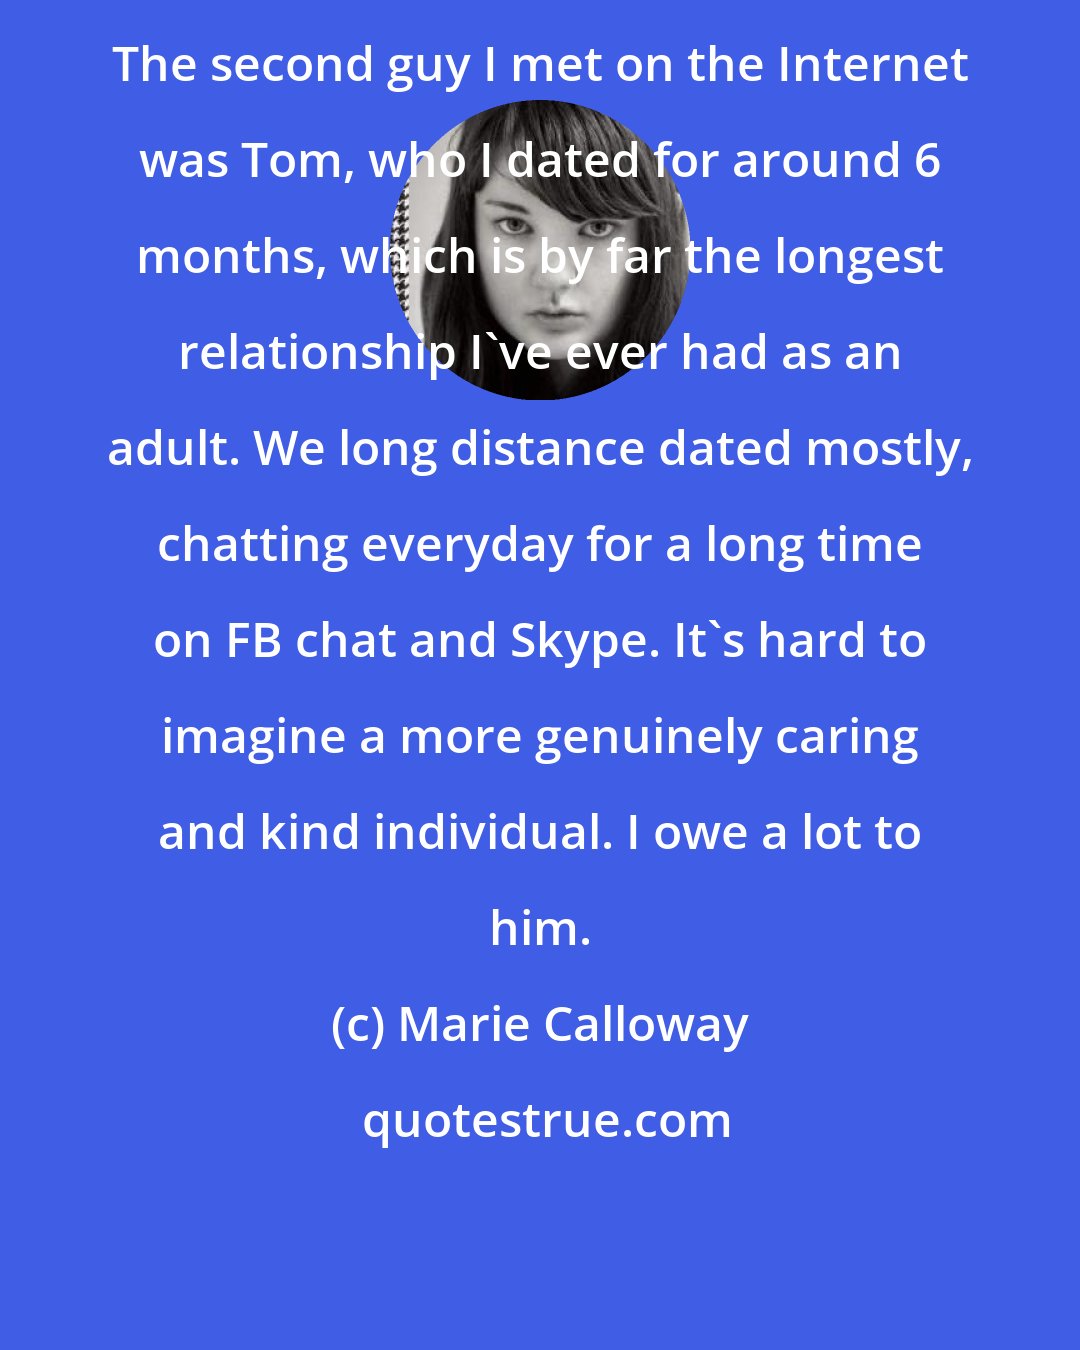 Marie Calloway: The second guy I met on the Internet was Tom, who I dated for around 6 months, which is by far the longest relationship I've ever had as an adult. We long distance dated mostly, chatting everyday for a long time on FB chat and Skype. It's hard to imagine a more genuinely caring and kind individual. I owe a lot to him.